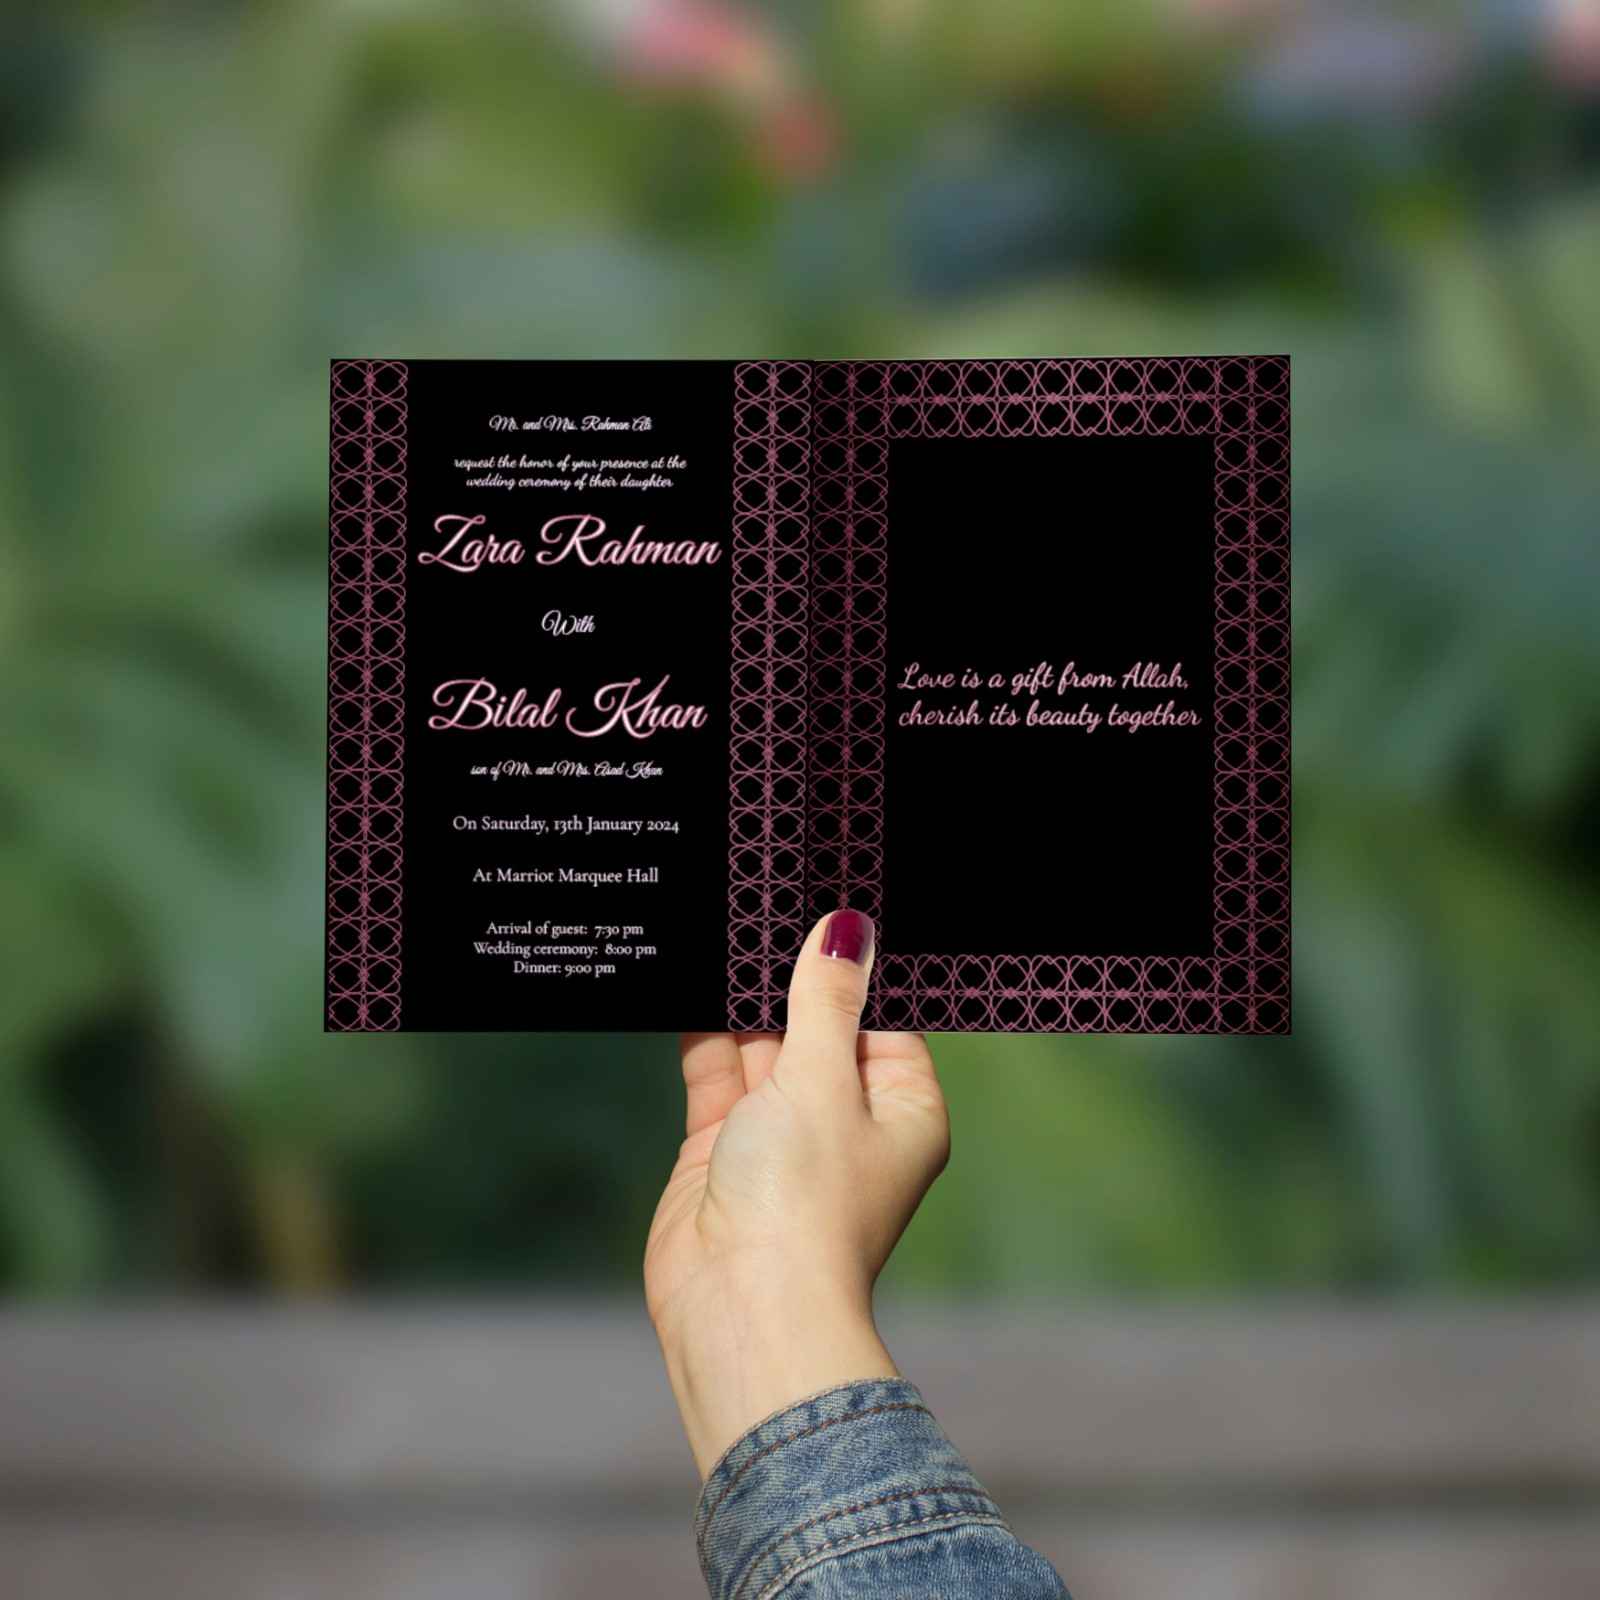 You will get Custom Card Designs for Every Occasion – Greetings, Invitations, and more!